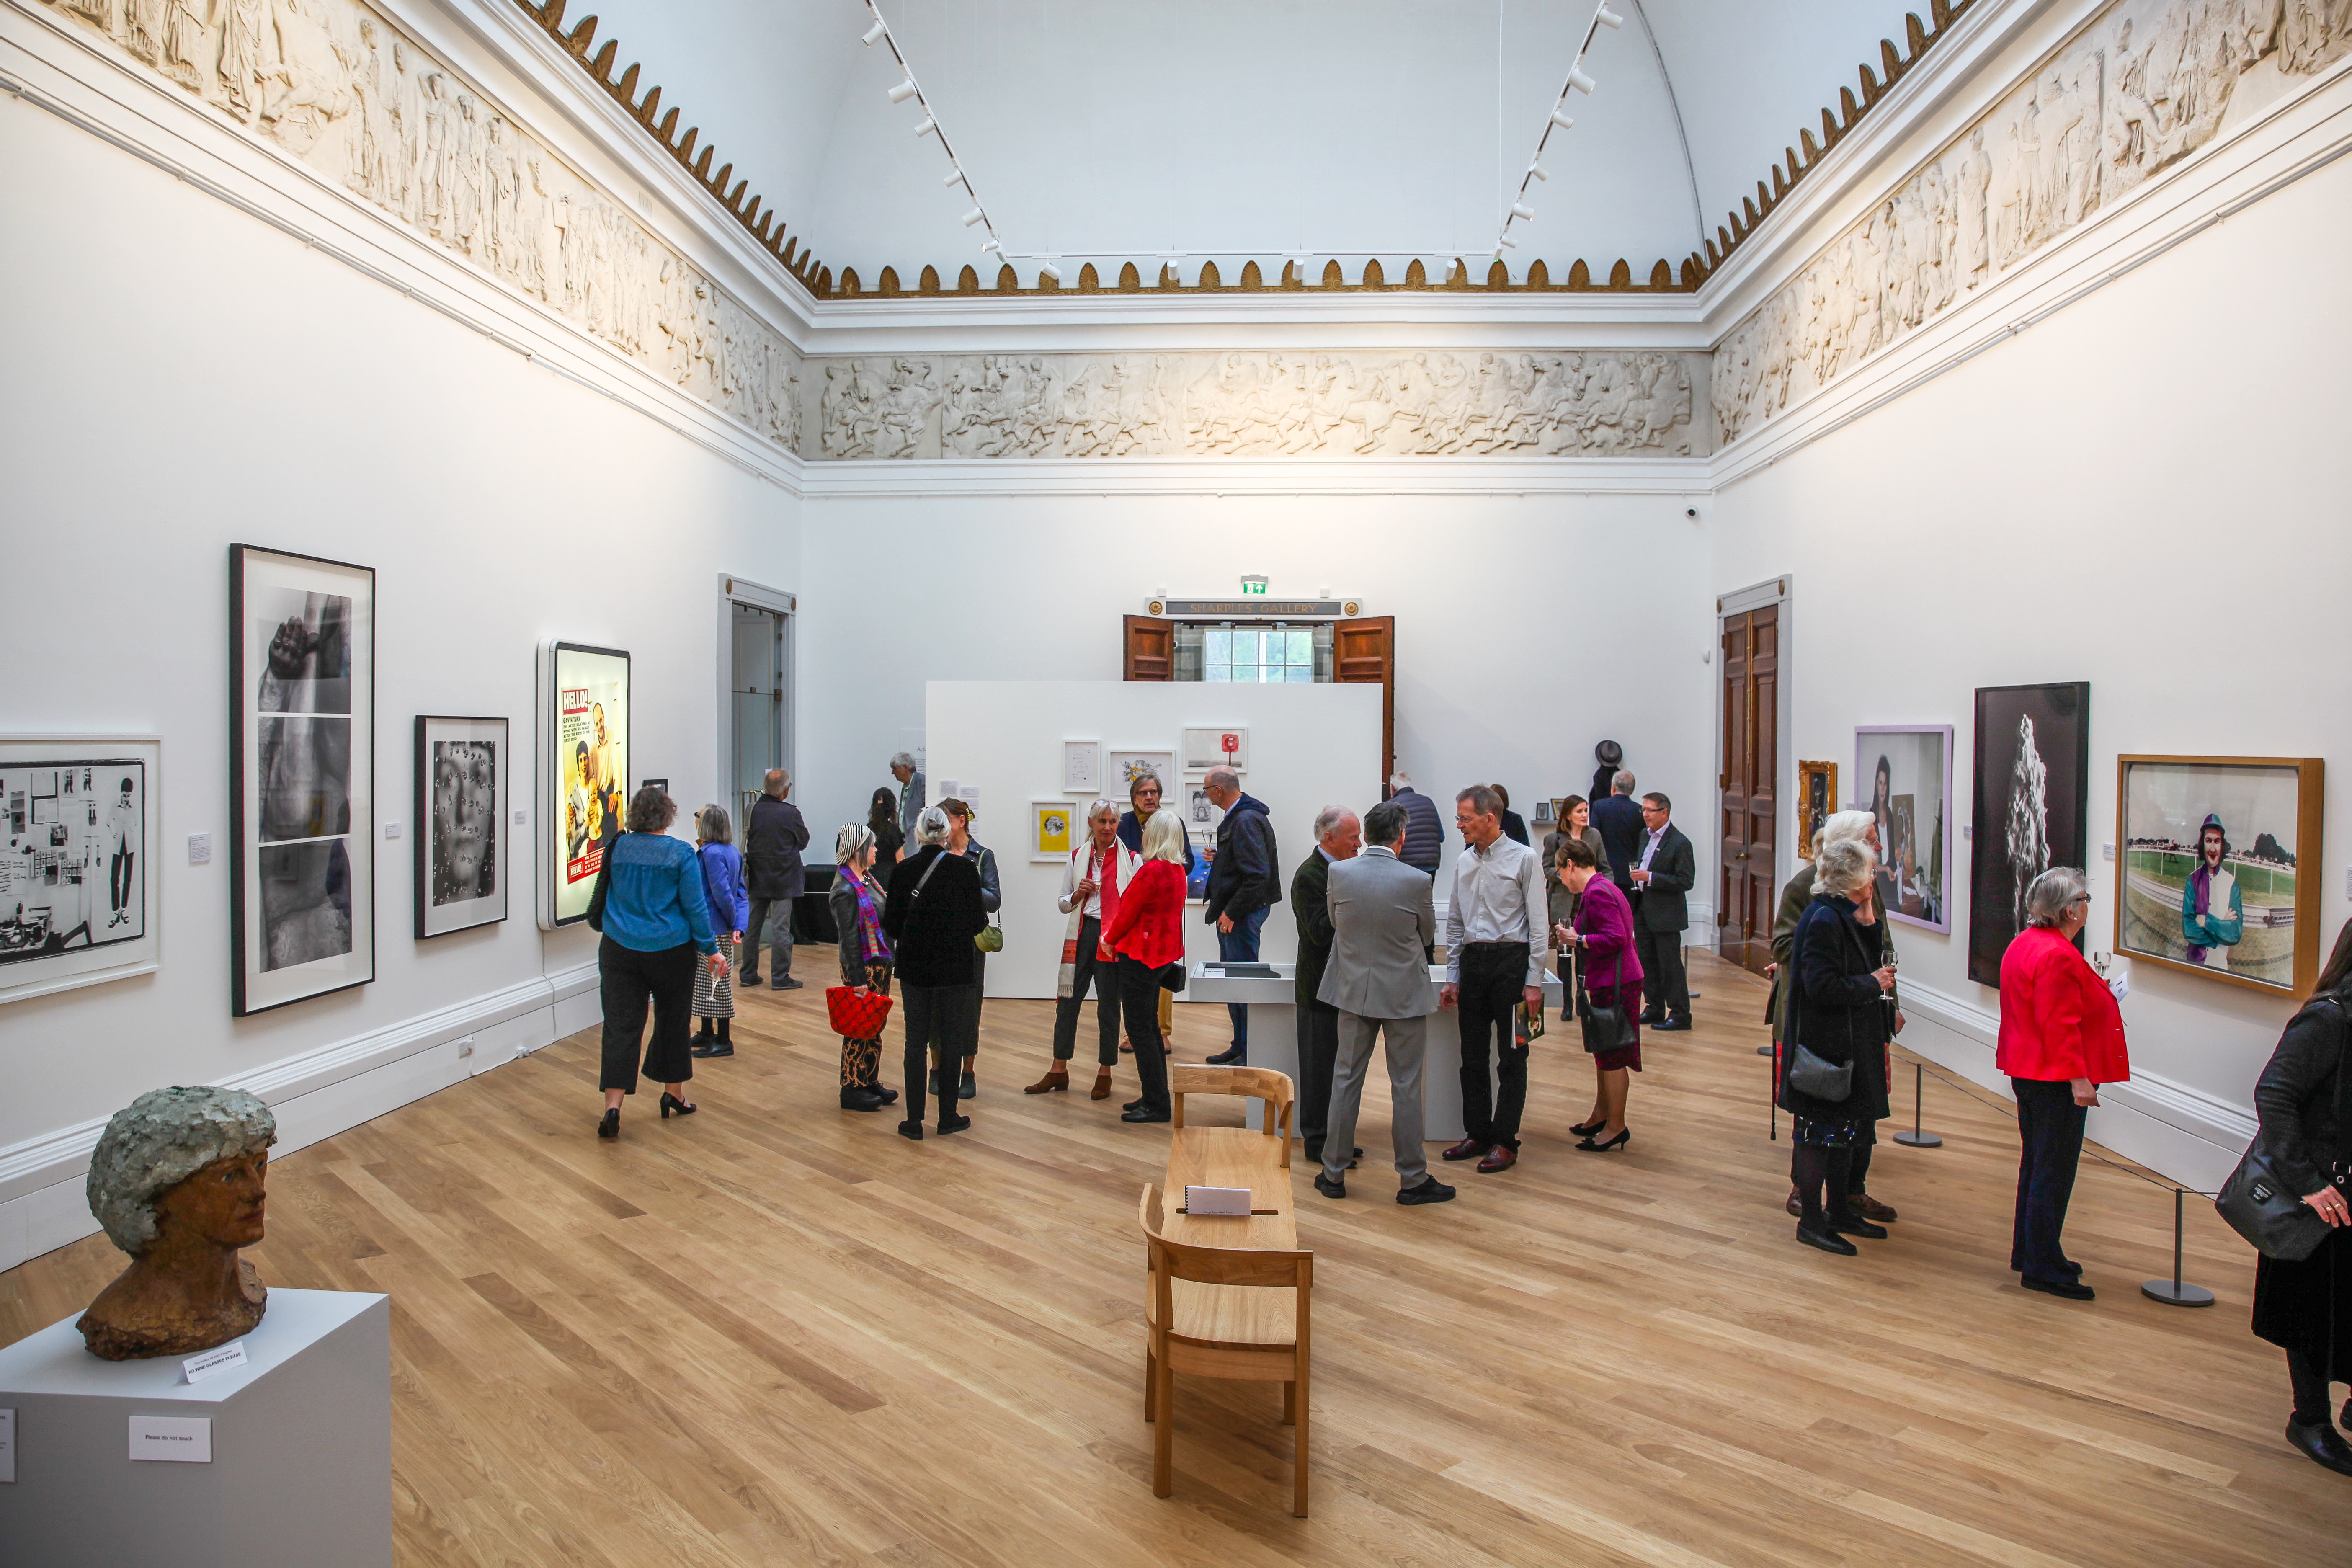 The Sharples gallery filled with people and the opening exhibition 